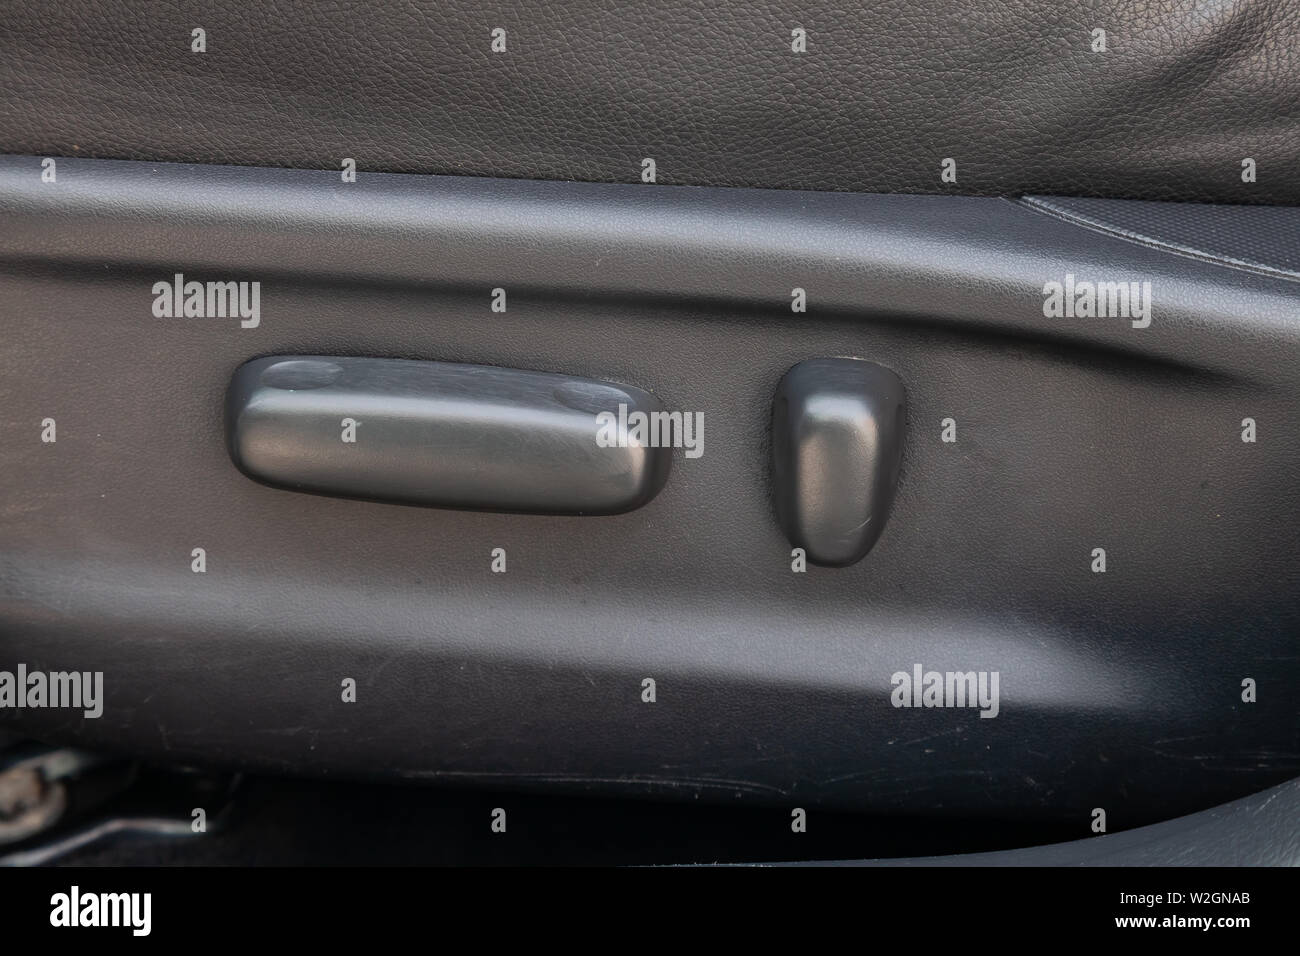 Novosibirsk, Russia - 07.09.2019: View to the interior of Toyota Camry 2006 with dashboard, front seats, gray leather and adjust buttons after cleanin Stock Photo